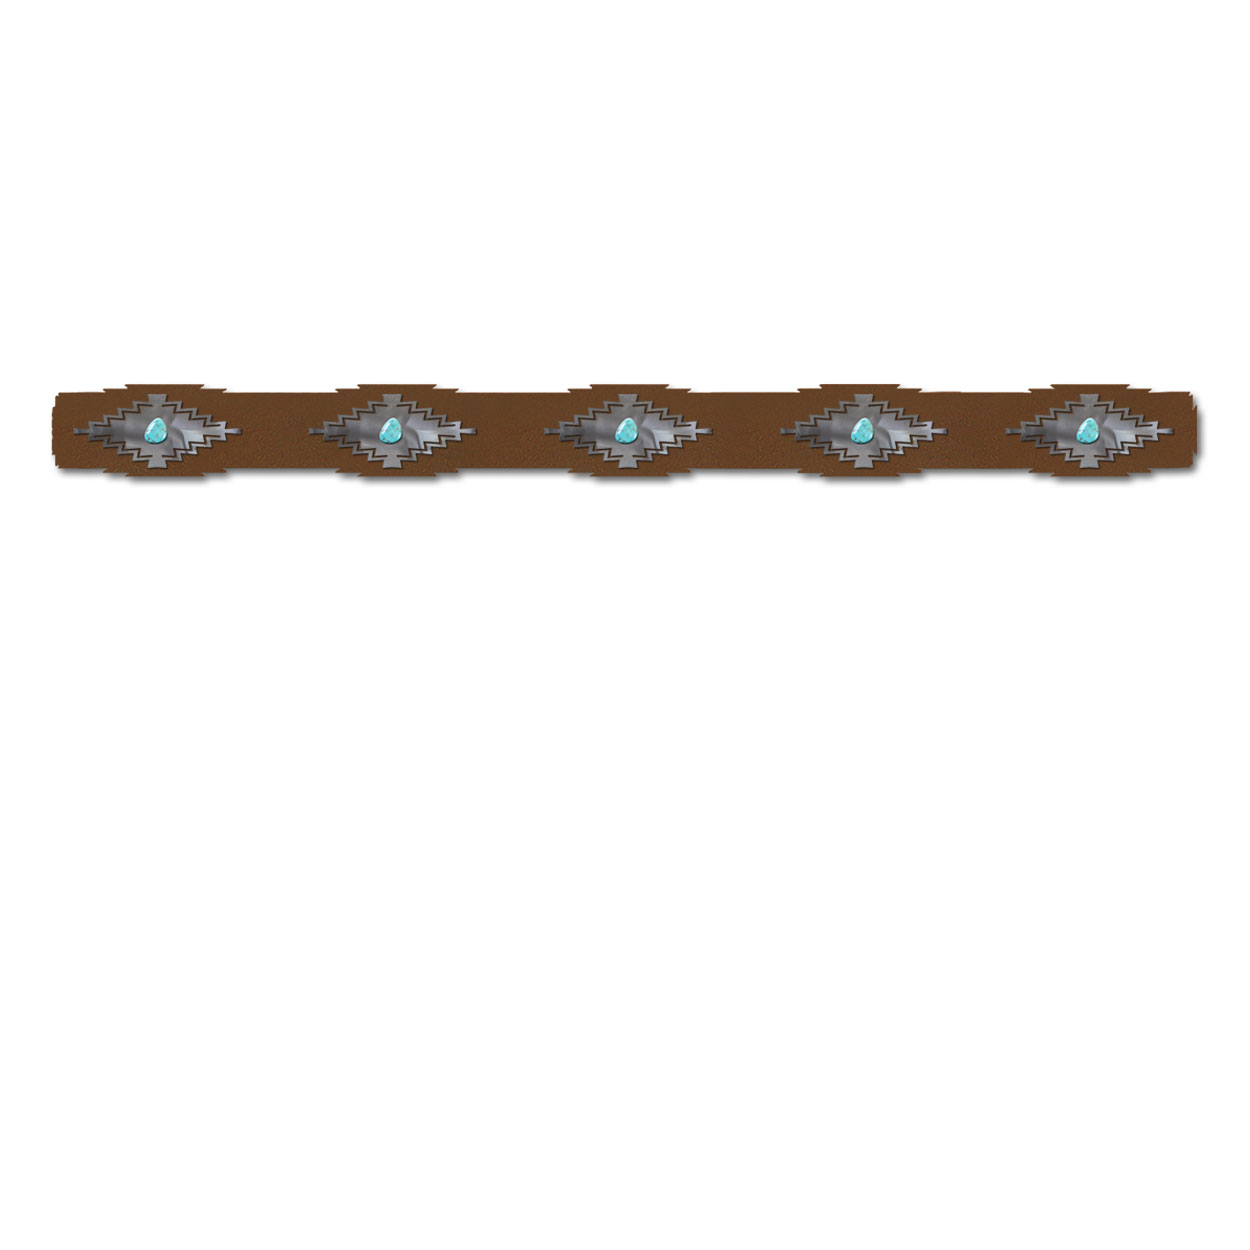 63.5in Metal Rug Hanger fits up to 60in Rug - Diamond with Turquoise Design in Rust Patina Finish - stk